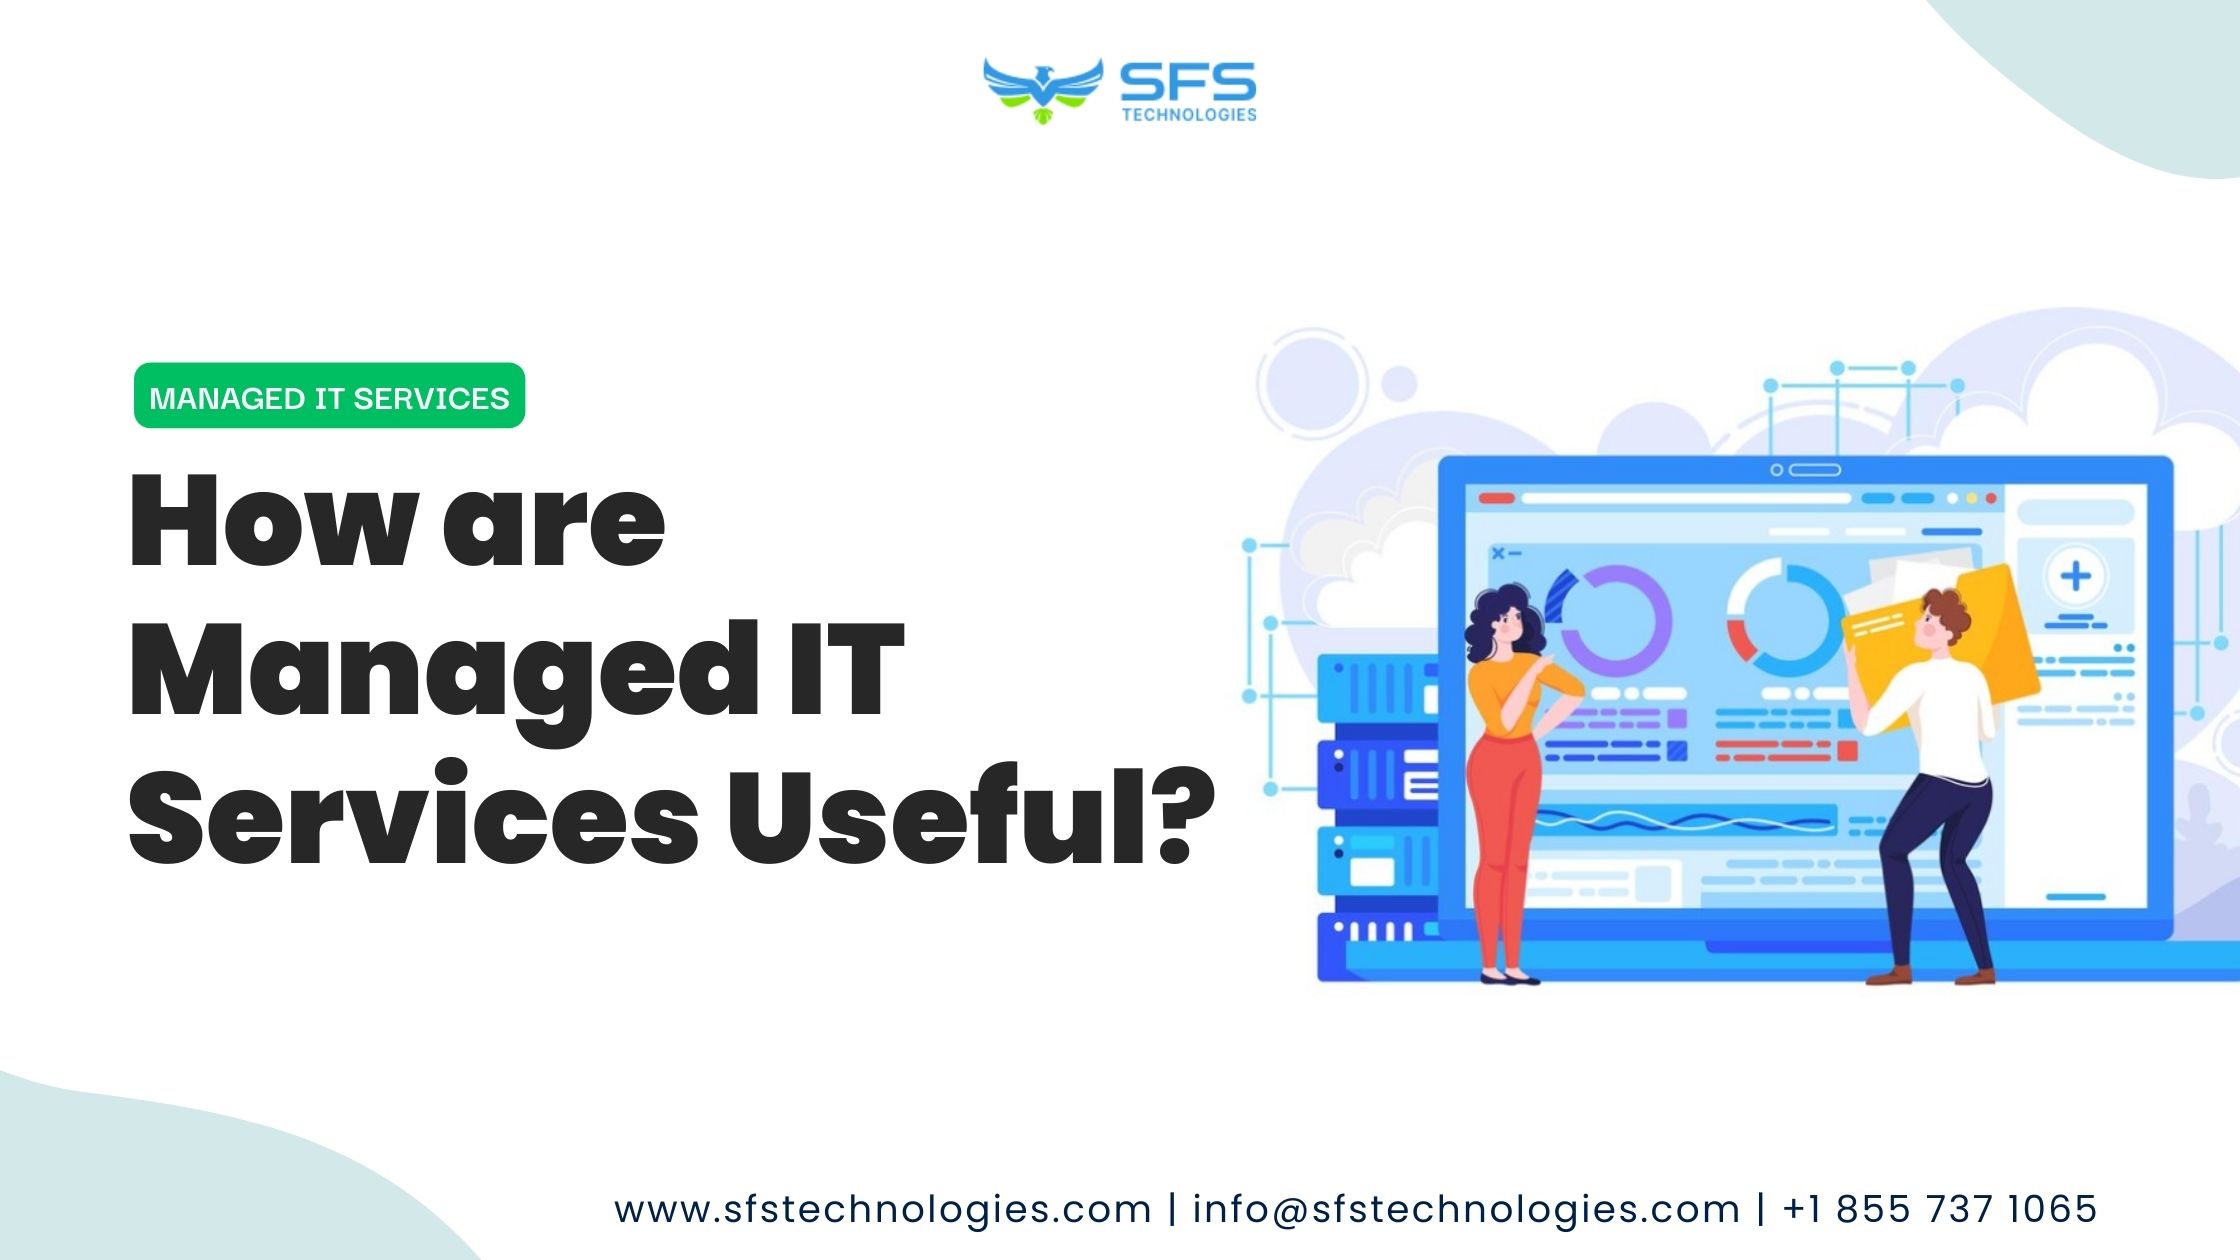 How are Managed IT Services Useful